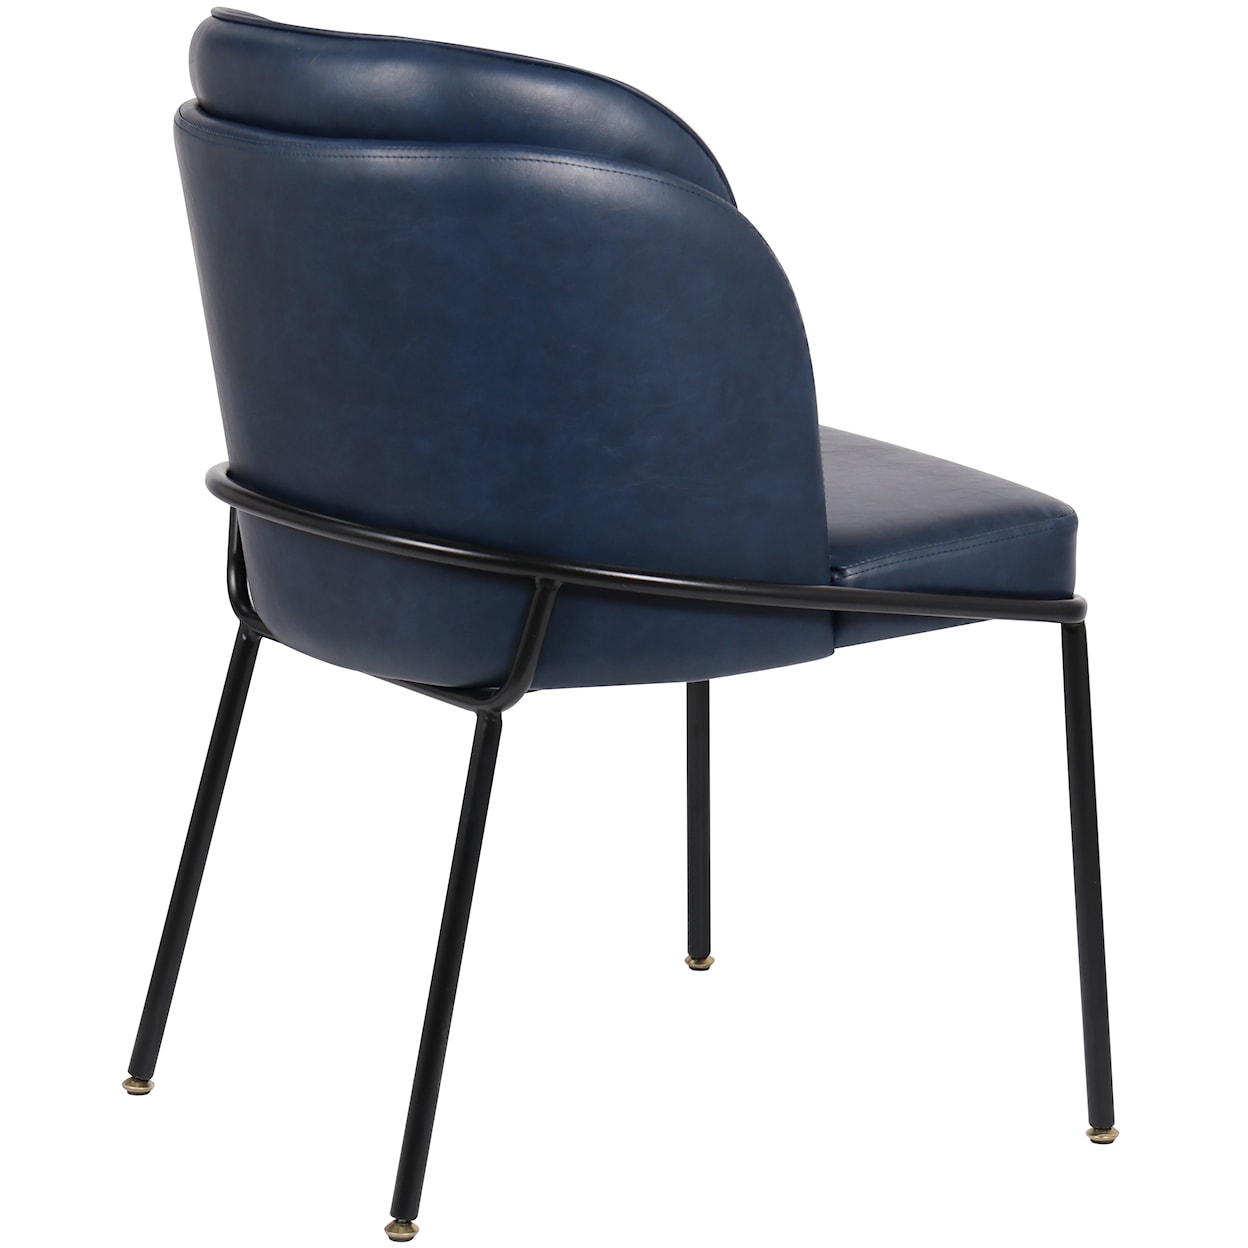 Meridian Furniture Jagger Dining Chair